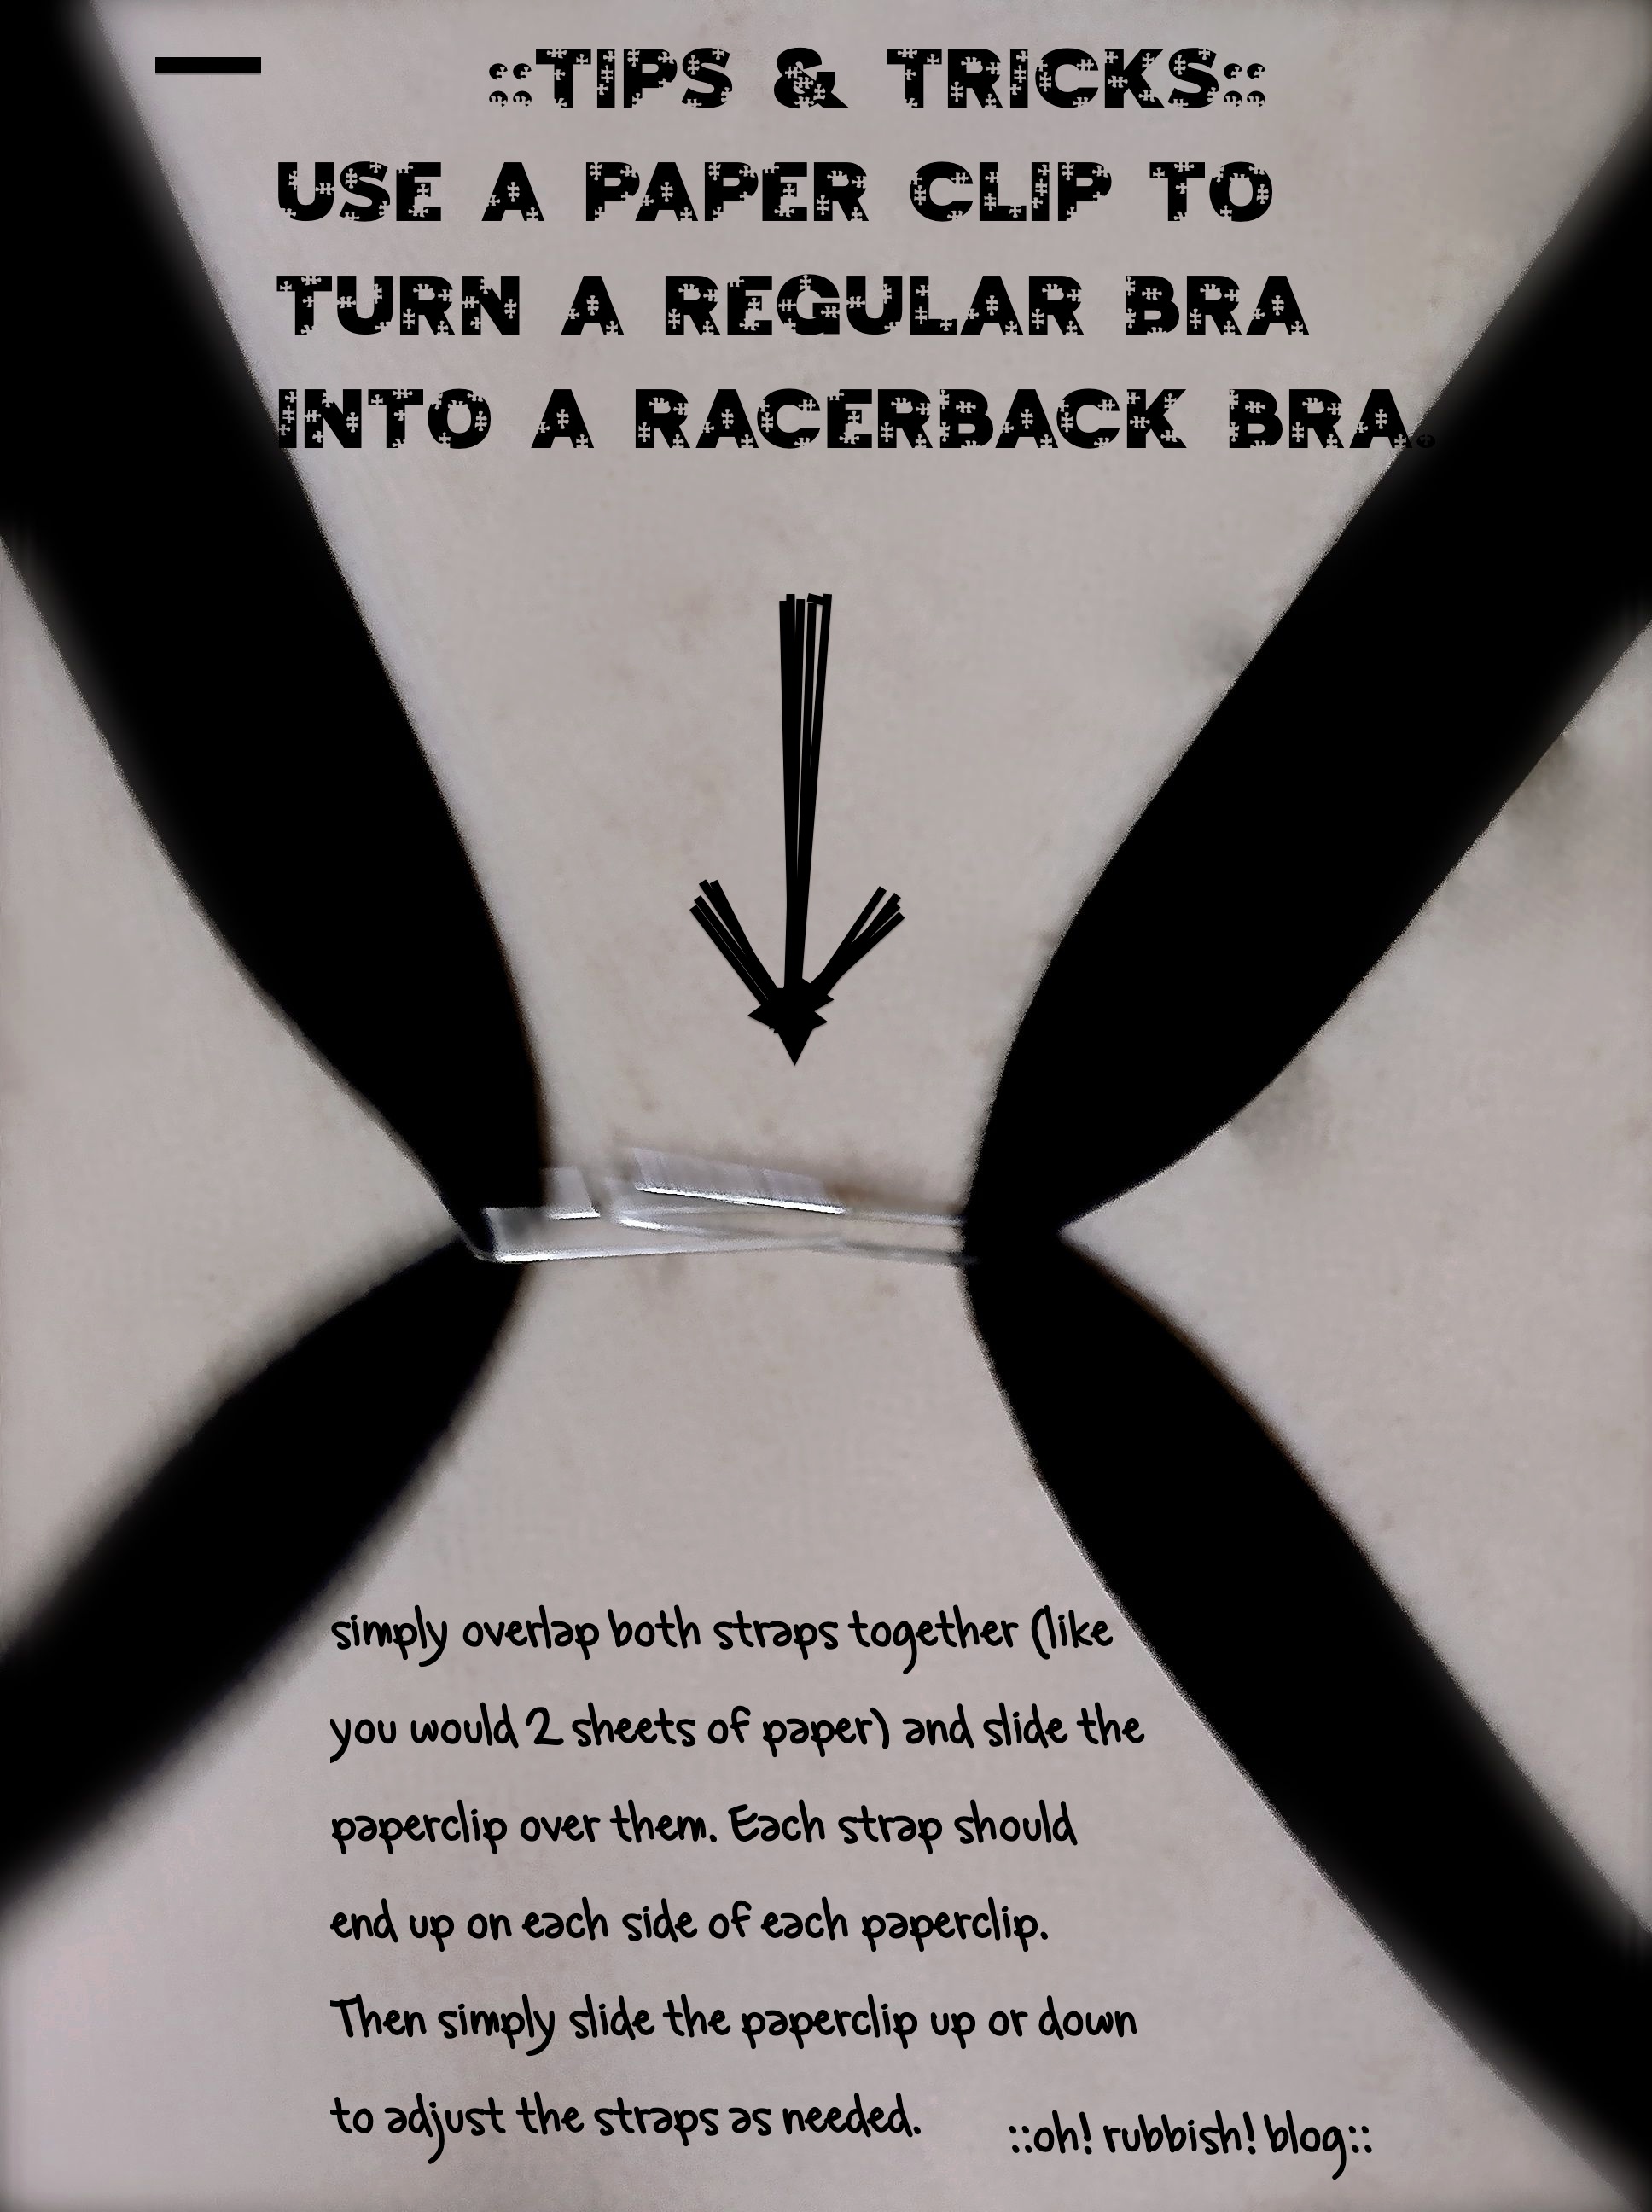 Paper Clip Trick - To quickly turn your standard bra into a